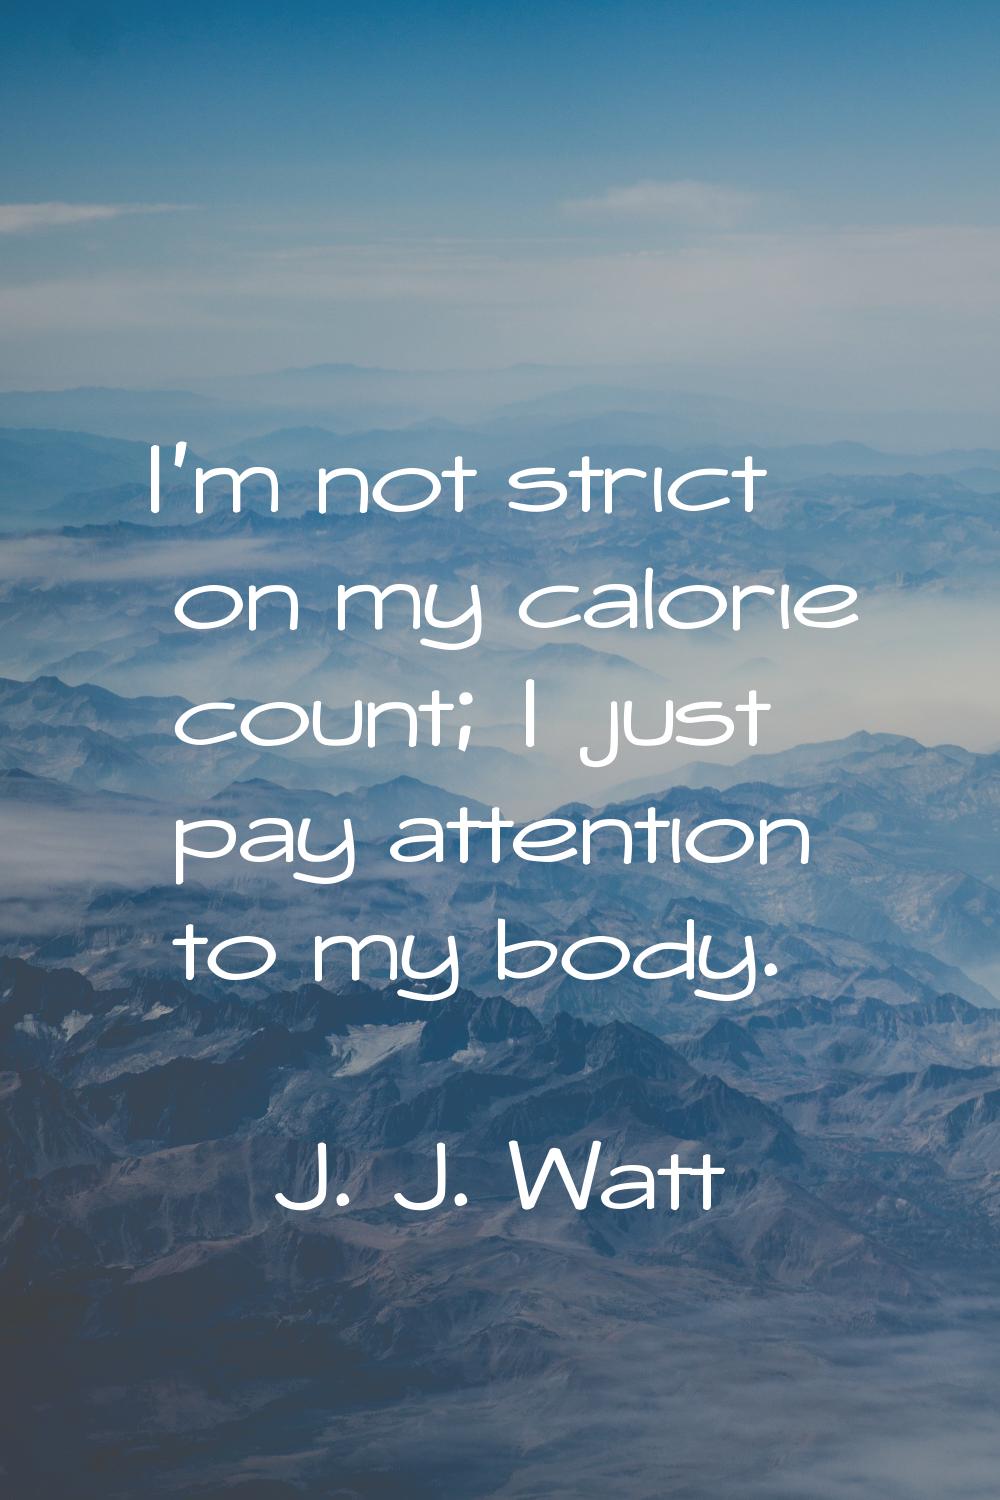 I'm not strict on my calorie count; I just pay attention to my body.